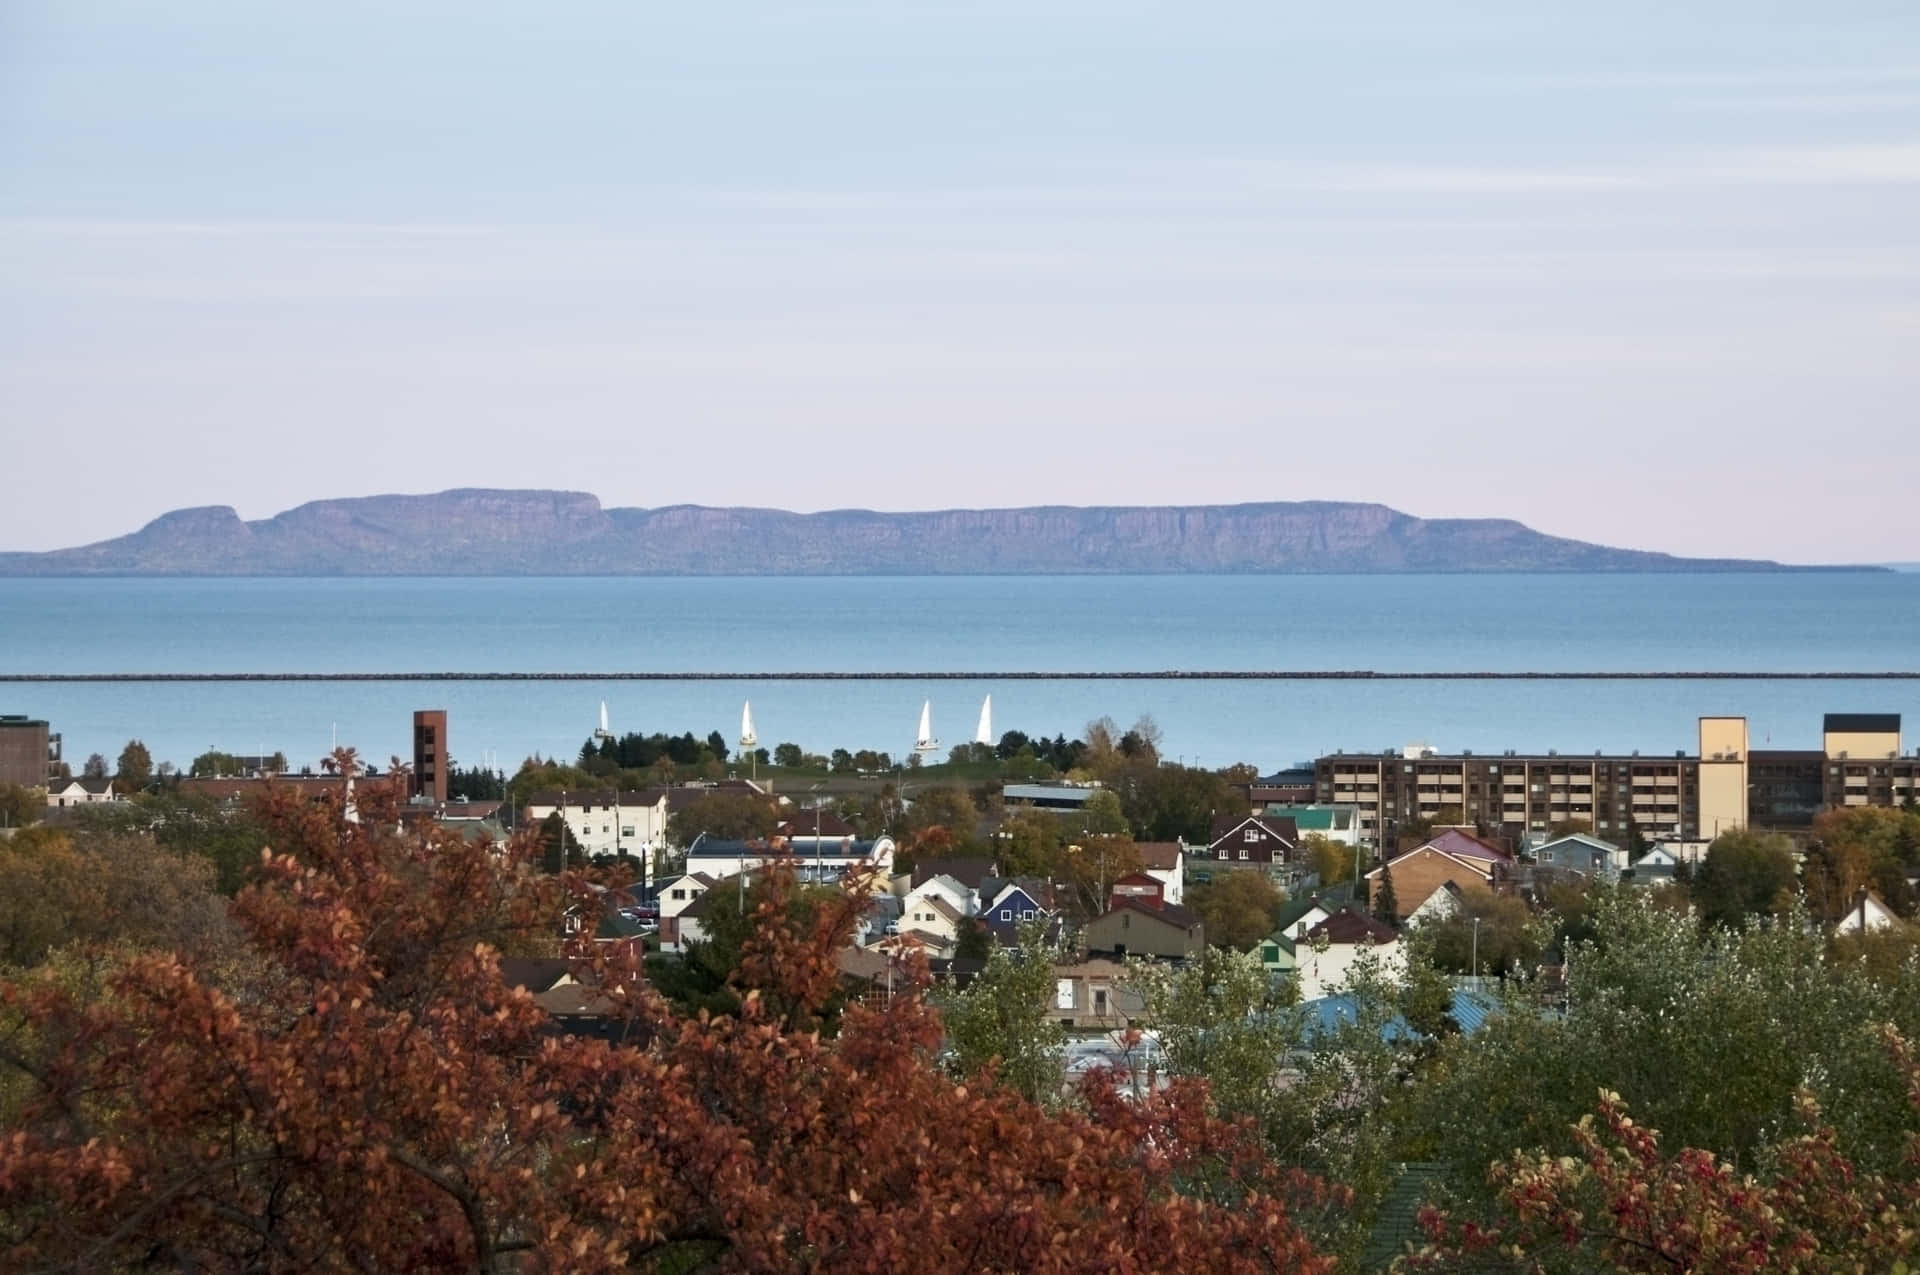 Thunder Bay Landscapewith Sleeping Giant Wallpaper